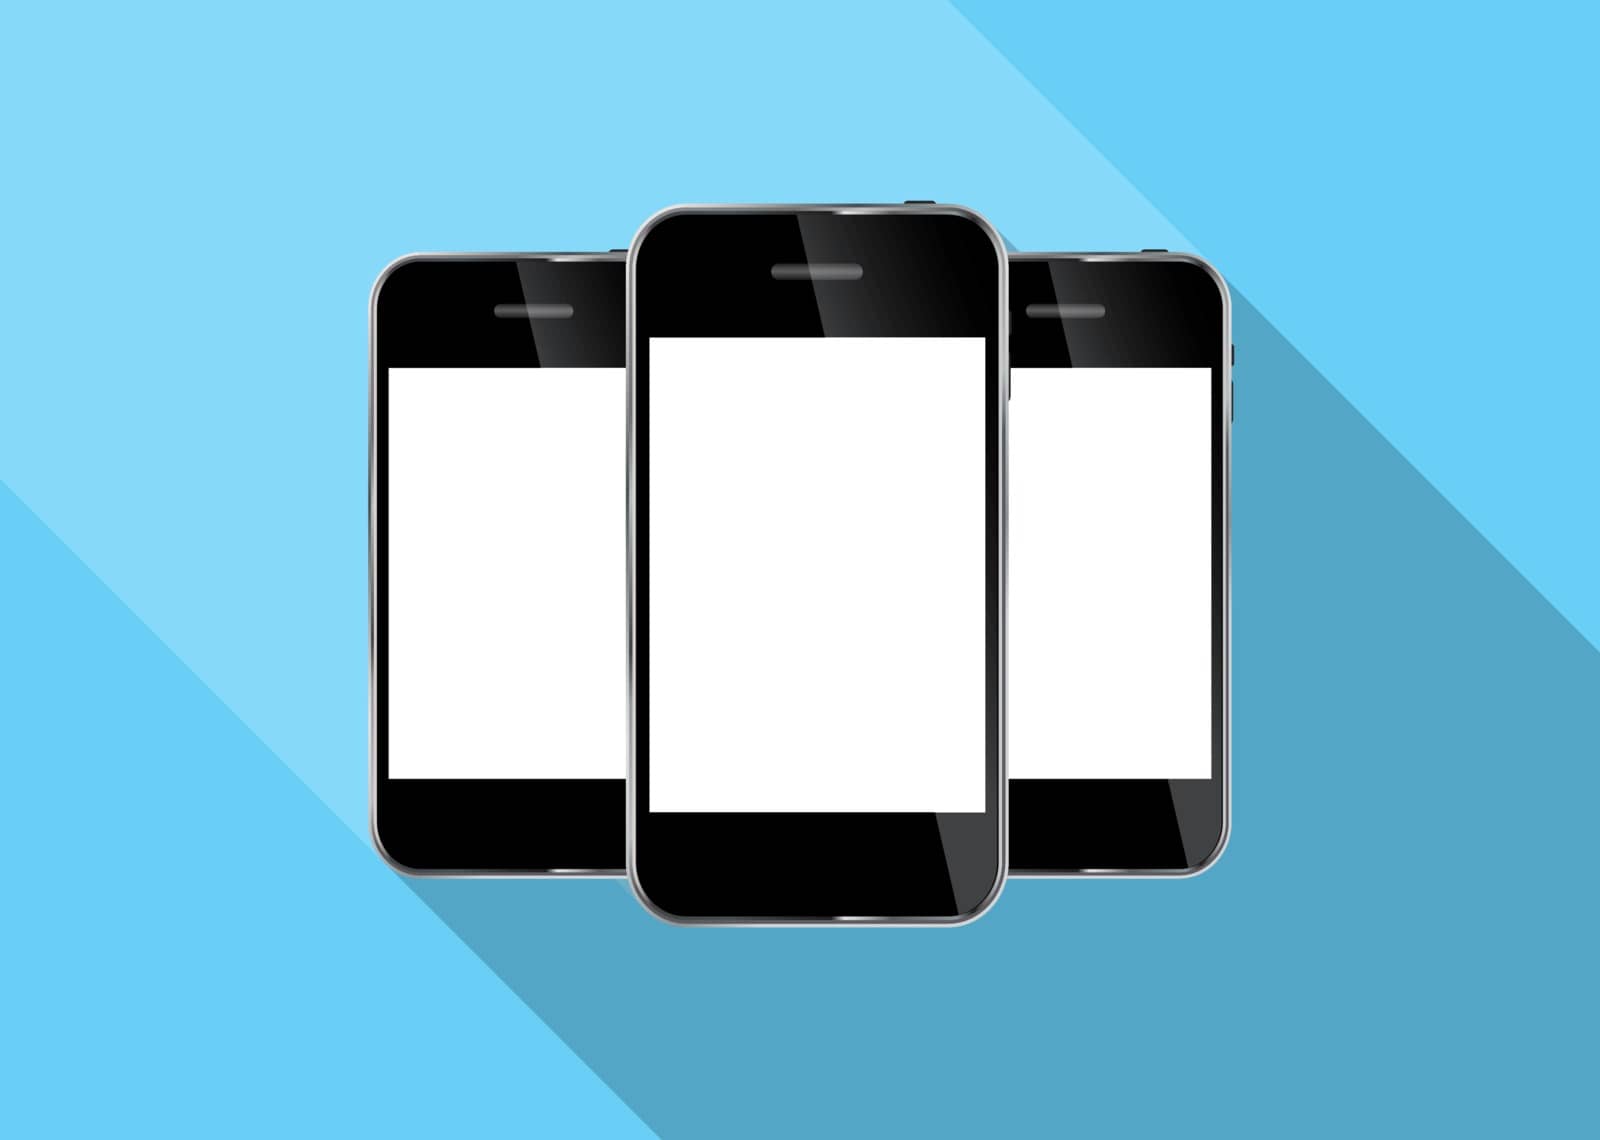 Abstract Design Realistic Mobile Phone Vector Illustration by yganko